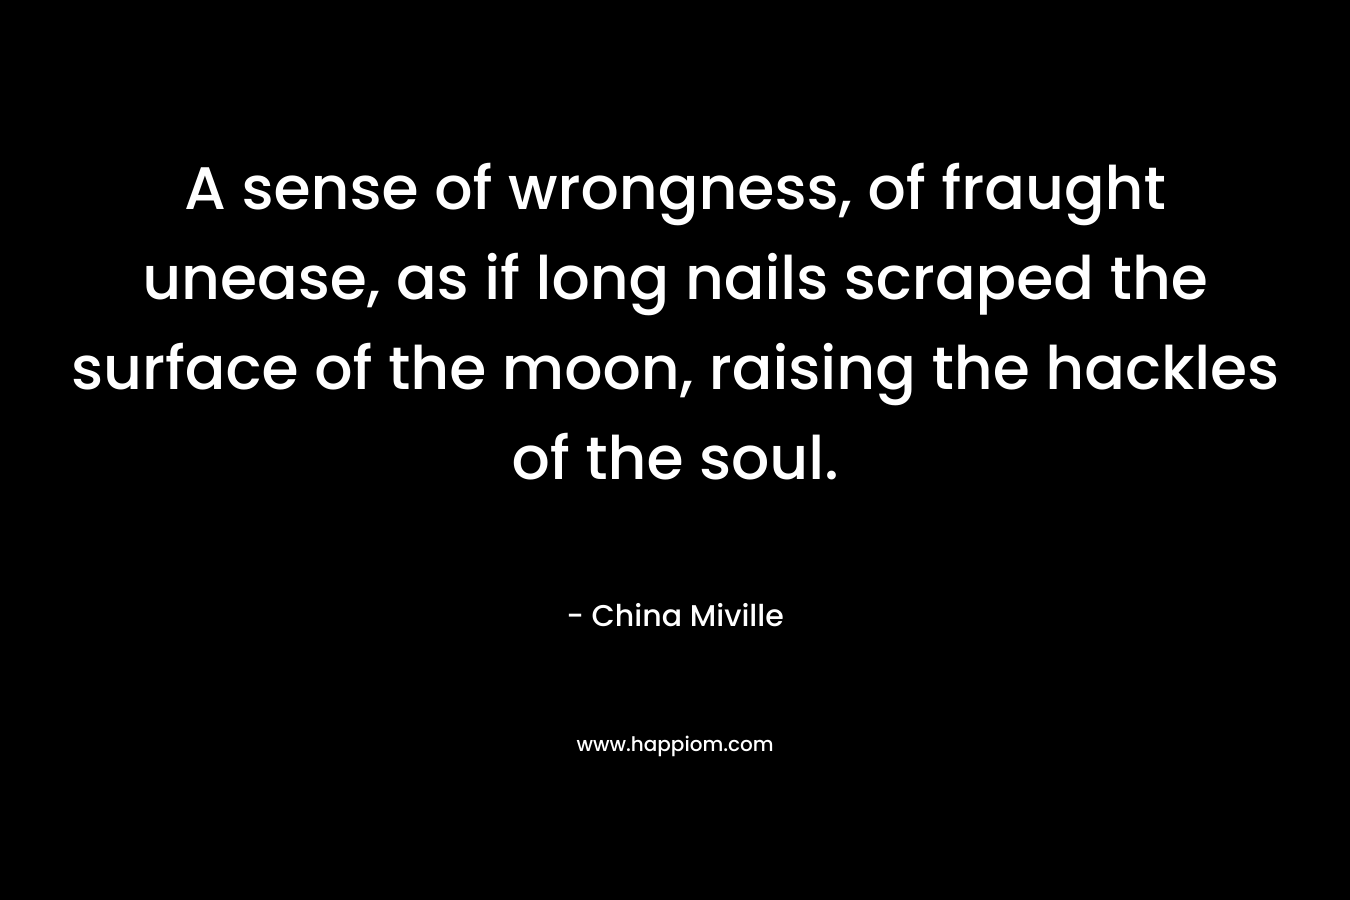 A sense of wrongness, of fraught unease, as if long nails scraped the surface of the moon, raising the hackles of the soul. – China Miville